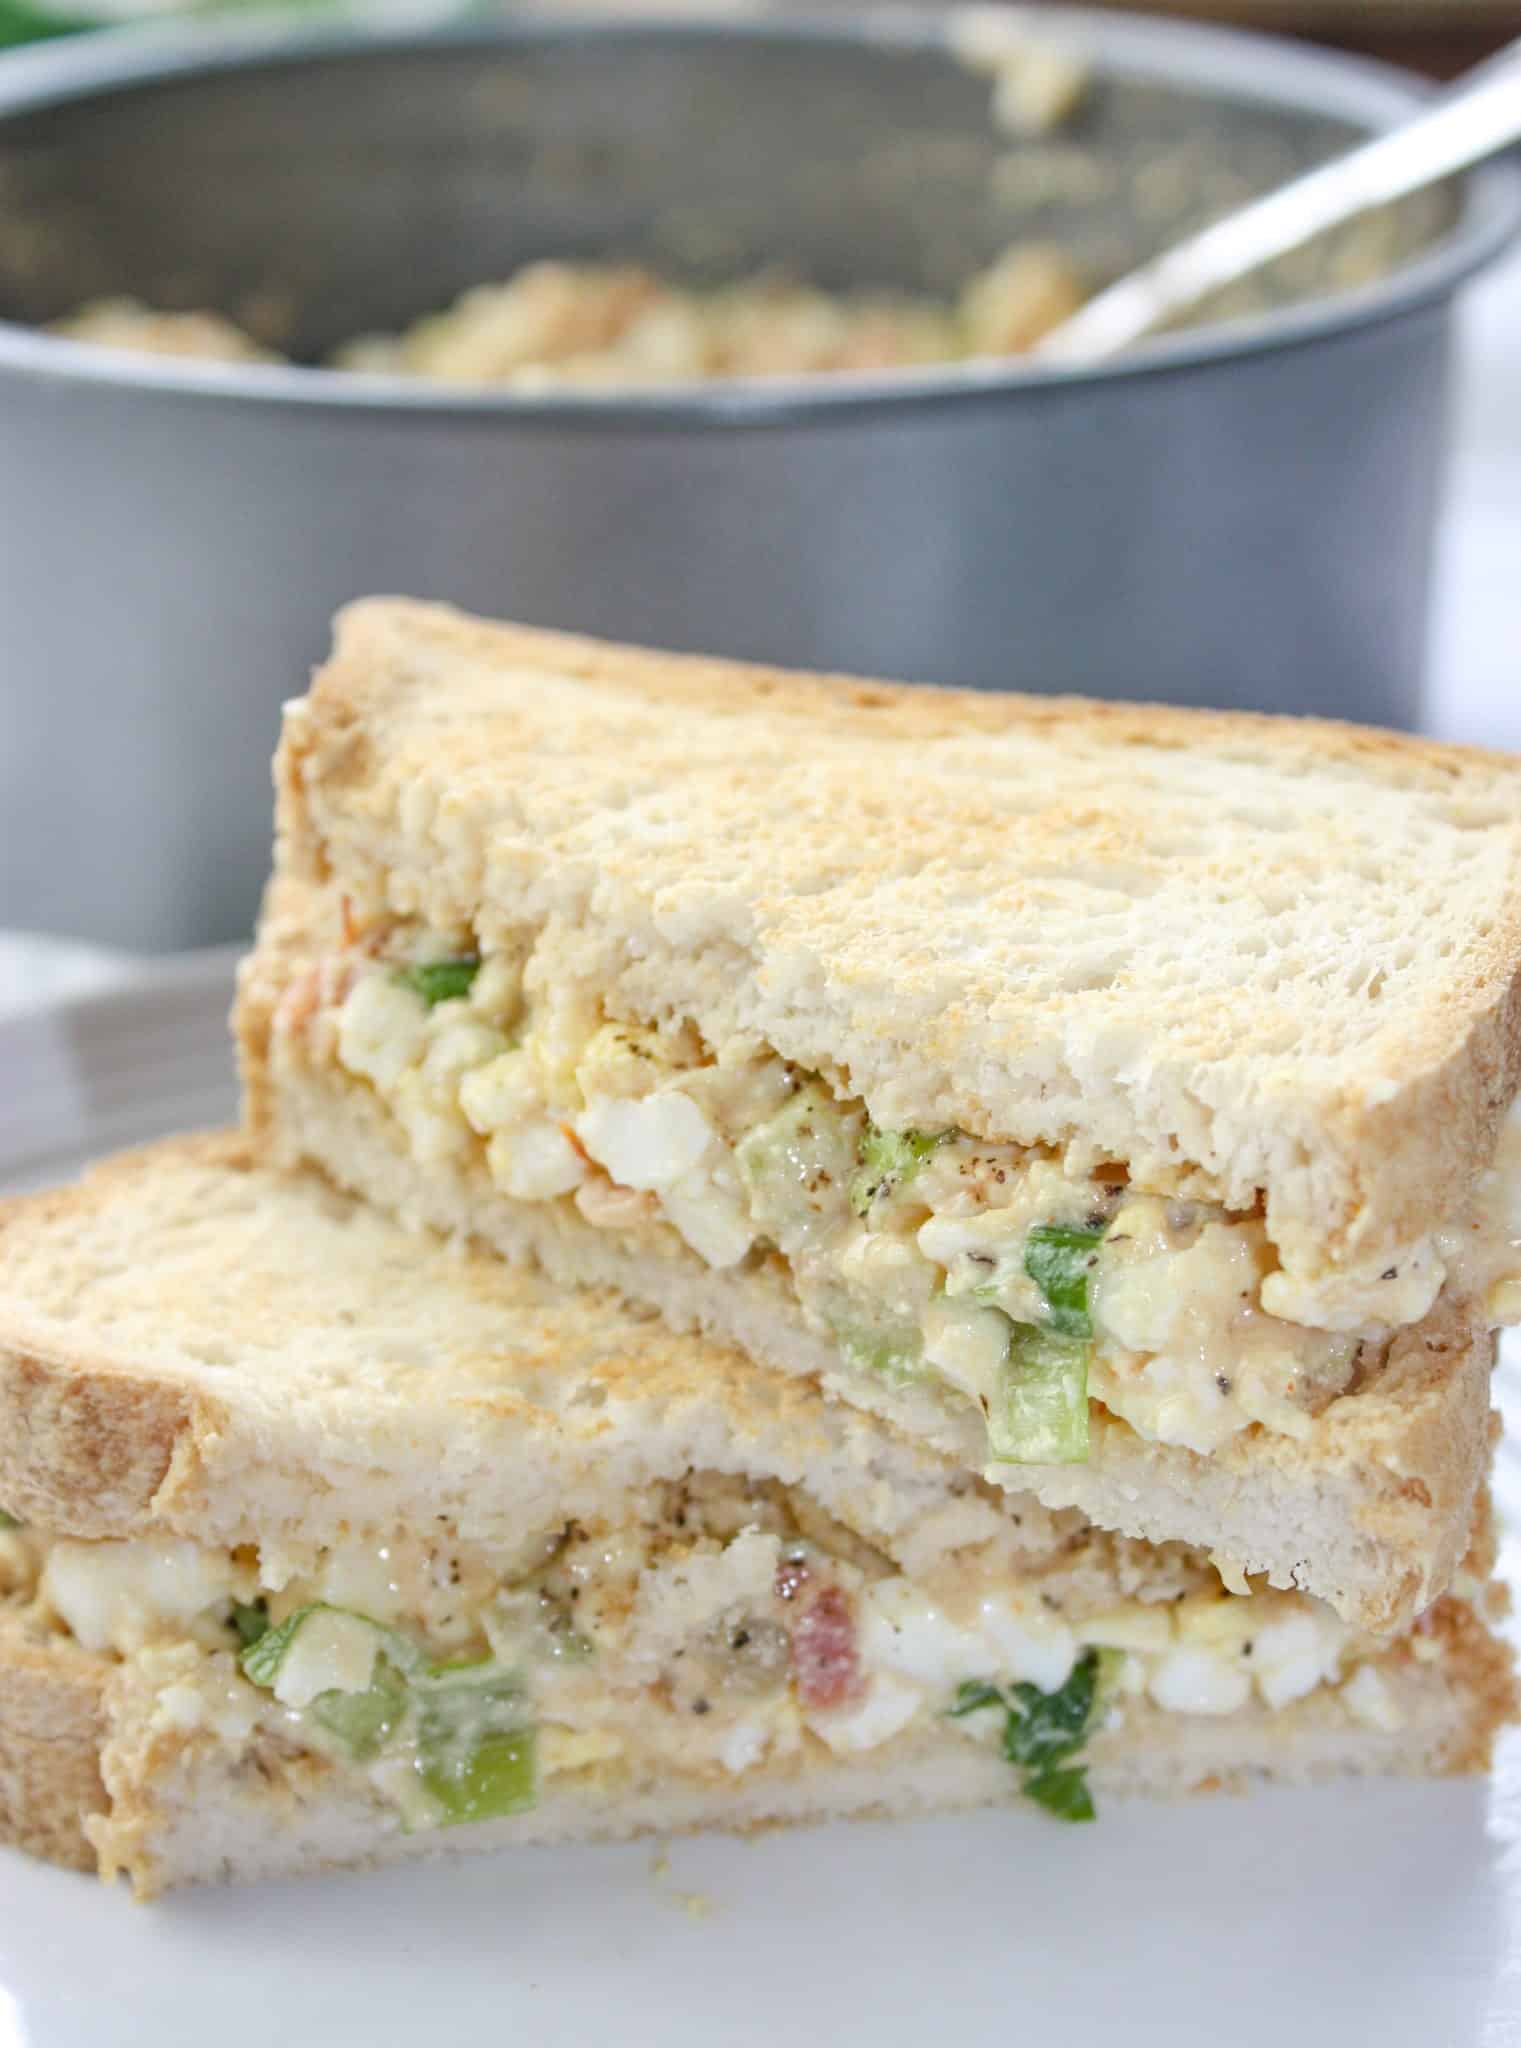 Thanks to the Instant Pot egg loaf method, egg salad sandwiches and egg dip for crackers are now on the menu a couple of times a month!